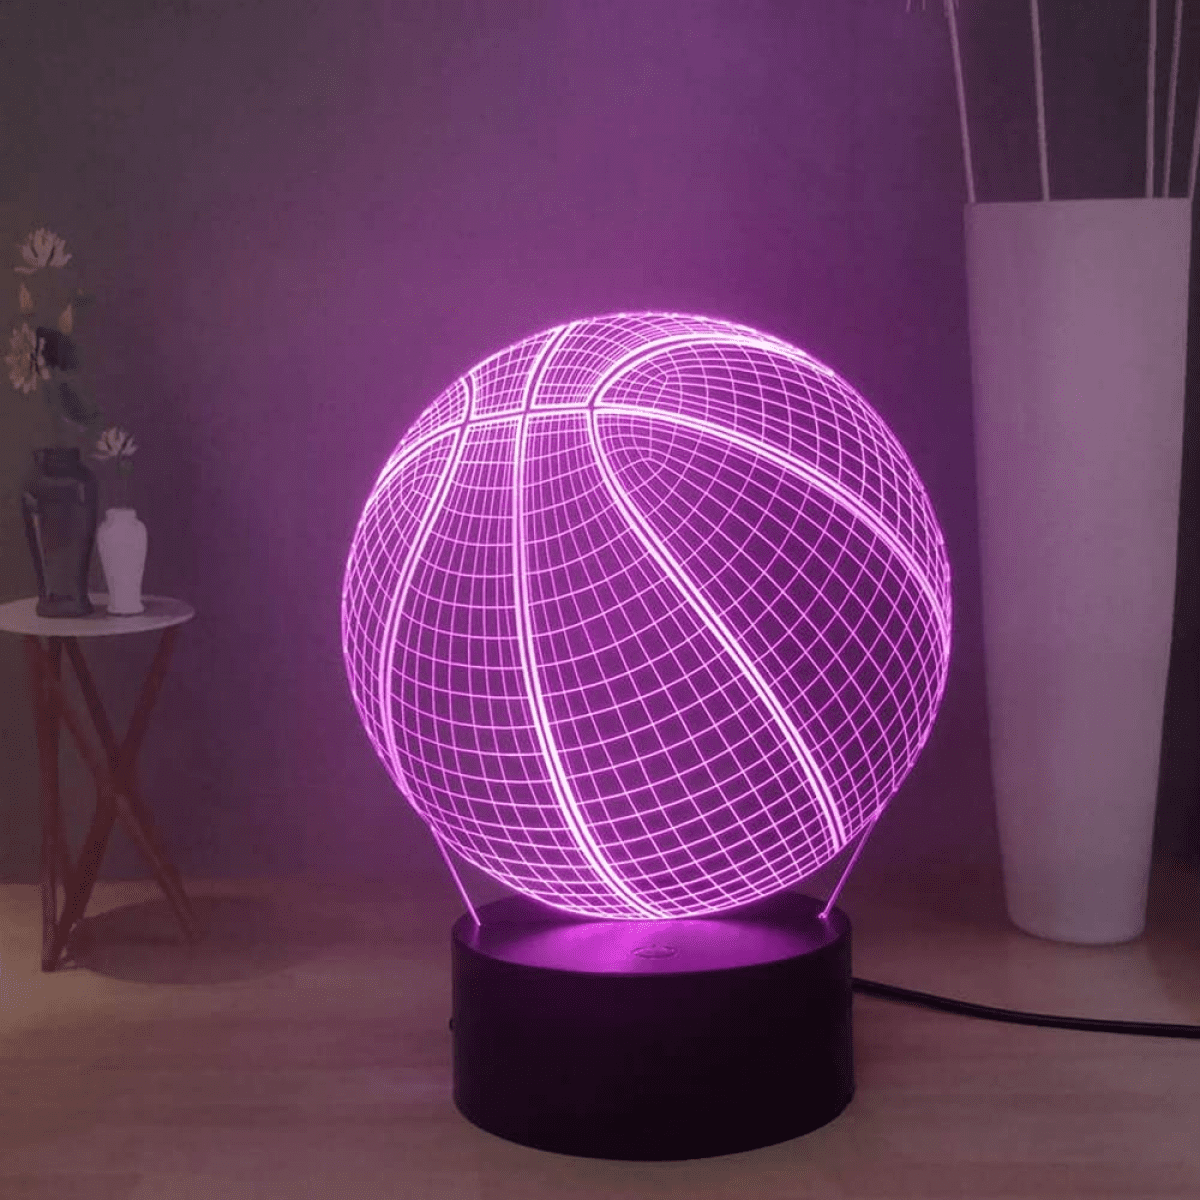 3D Optical Illusion LED Desk Lamp,Basketball 7 Color Changing USB Touch Night Light Outdoor Sports Lover Presents Home Bedroom Decor Lighting 